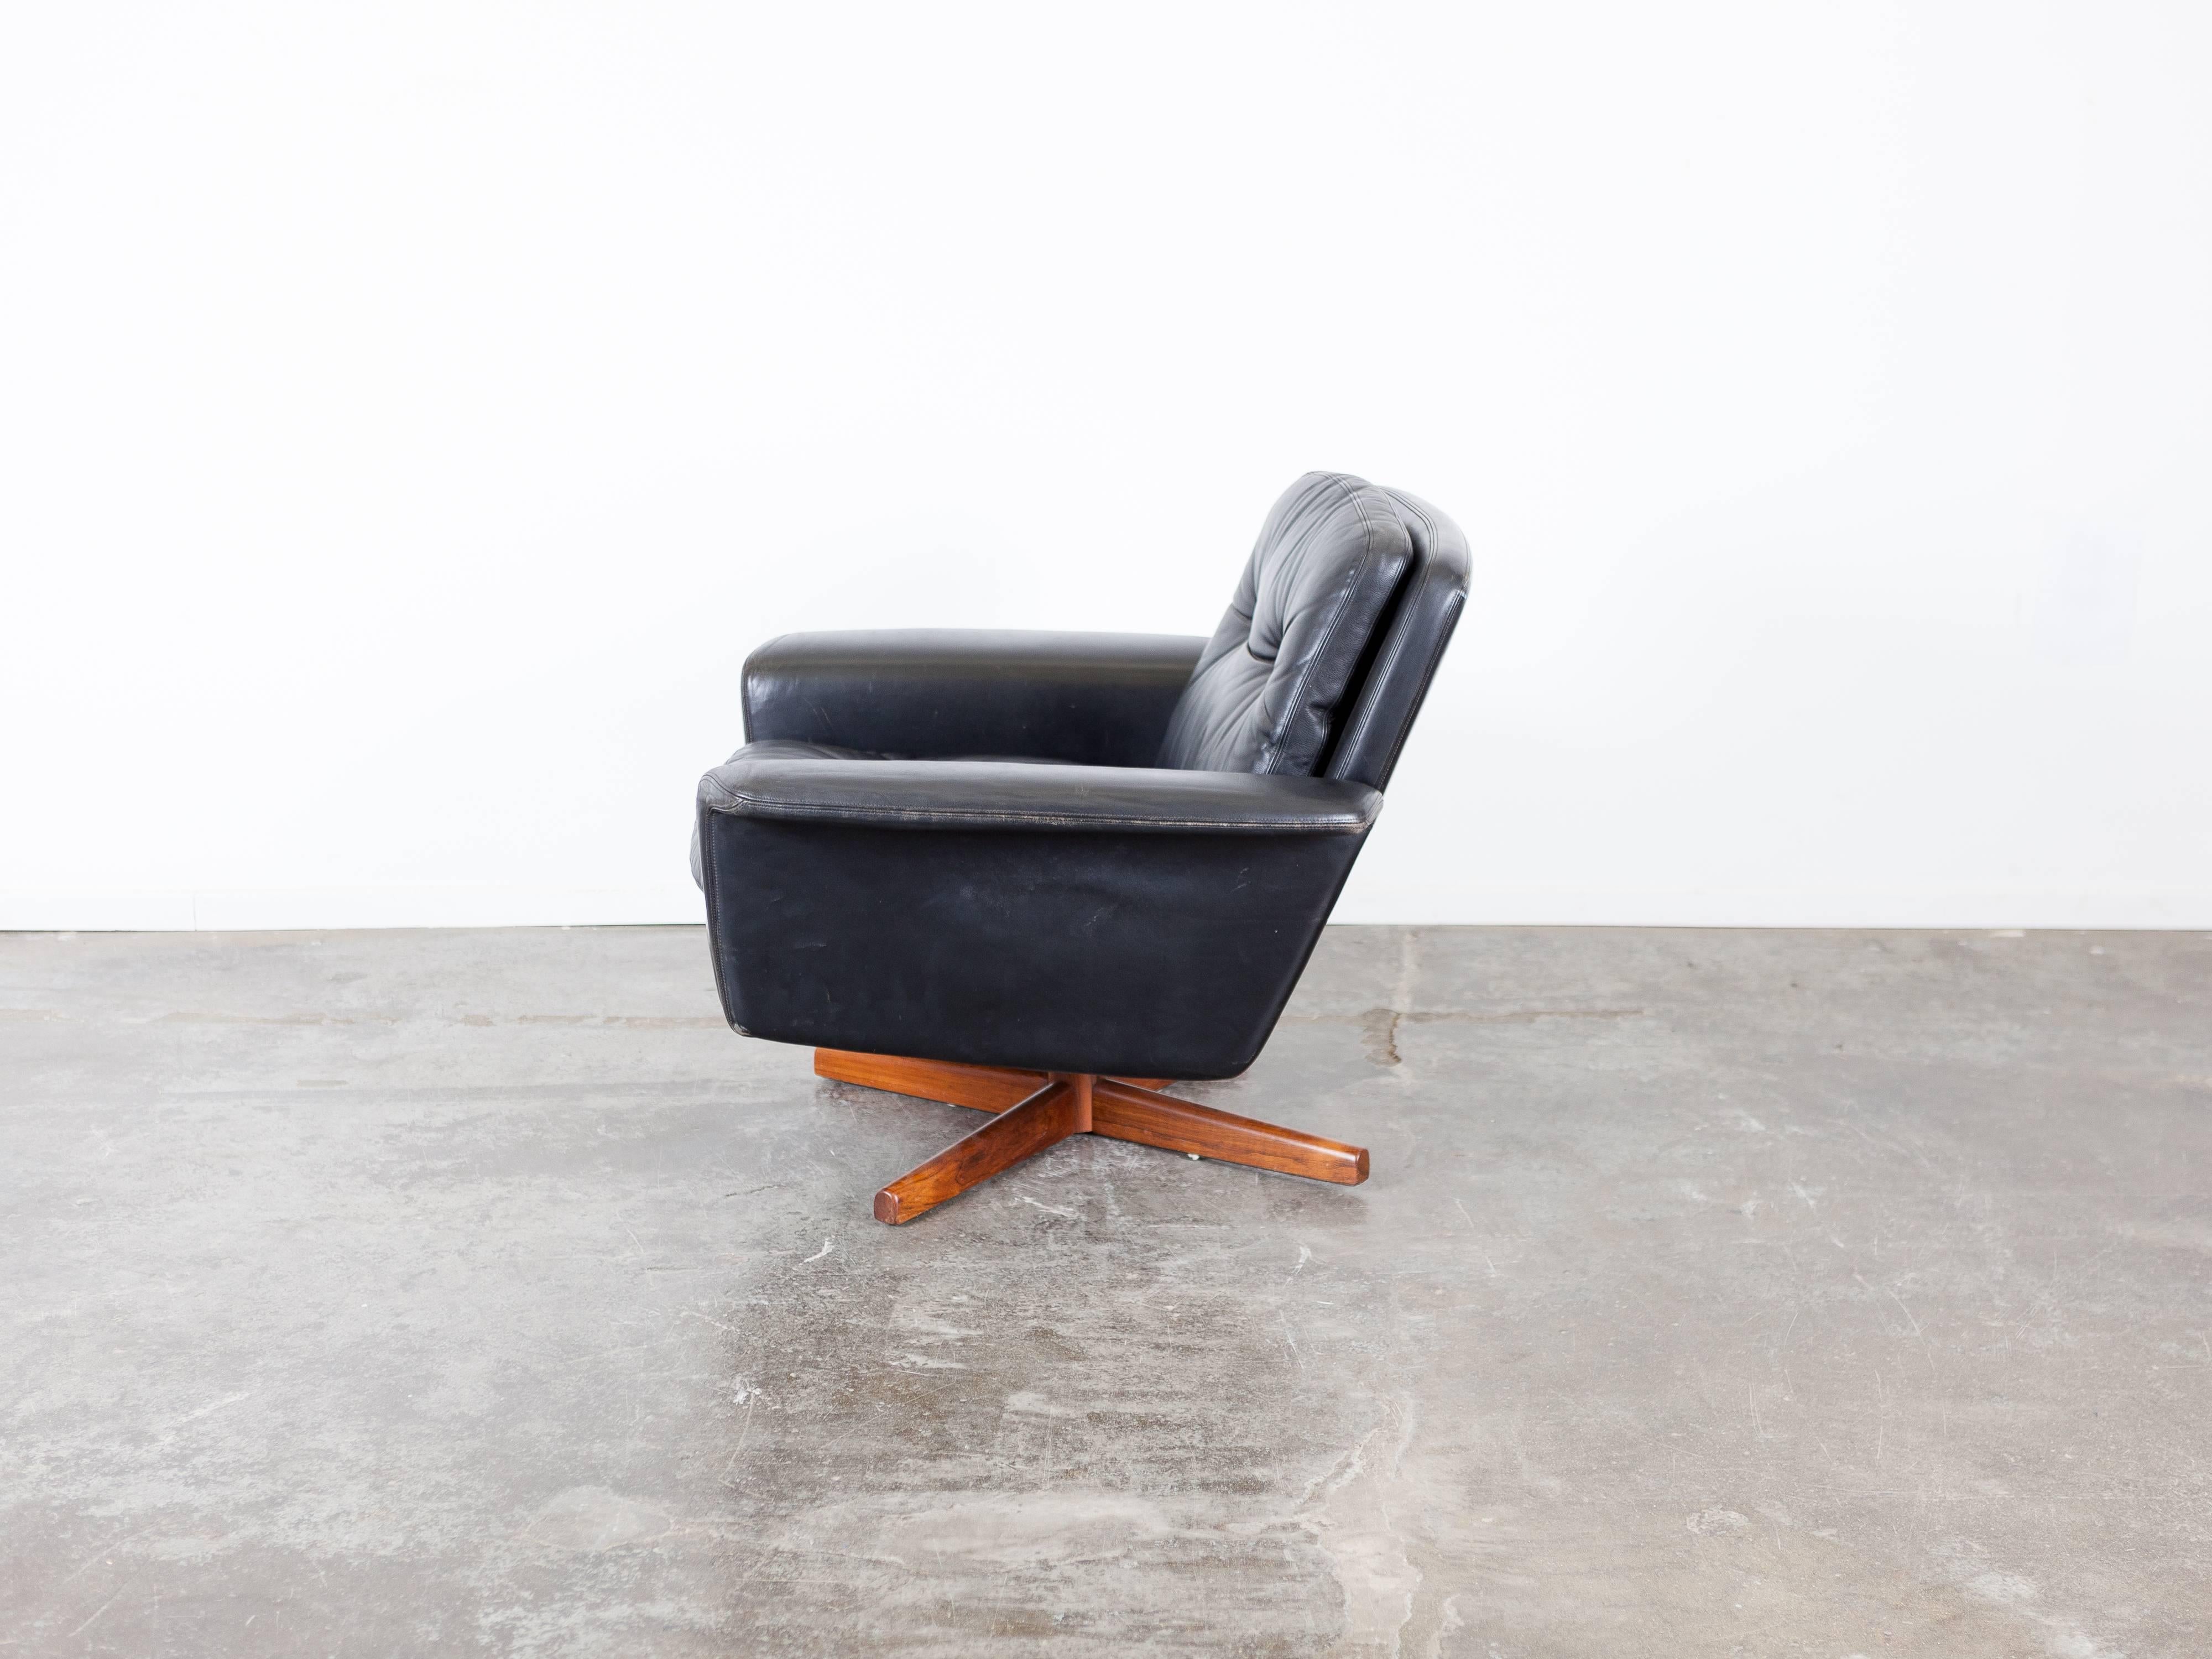 Black leather tufted swivel lounge chair, 1960s, Norwegian, produced by Vatne Mobler.